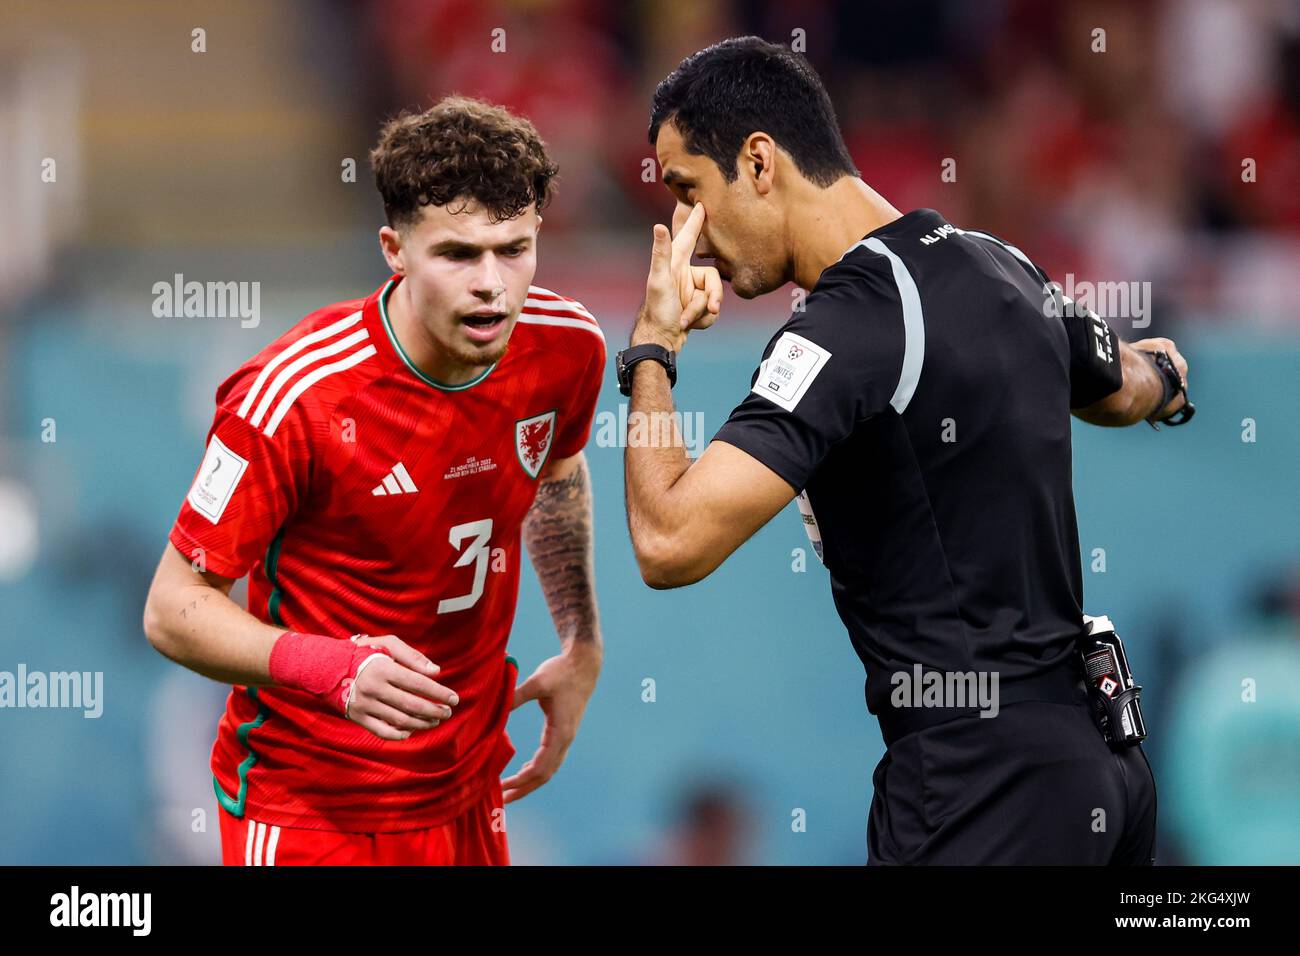 Al-Rayyan, Qatar. 21st Nov, 2022. Al Rayyan, Qatar. 21st Nov, 2022. AL-RAYYAN, AR - 21.11.2022: USA VS WALES - Referee Abdulrahman Al Jassim argues with WILLIAMS Neco during a match between the United States and Wales, valid for the group stage of the World Cup, held at the Ahmed bin Ali Stadium in Al-Rayyan, Qatar. (Photo: Marcelo Machado de Melo/Fotoarena) Credit: Foto Arena LTDA/Alamy Live News Credit: Foto Arena LTDA/Alamy Live News Credit: Foto Arena LTDA/Alamy Live News Stock Photo